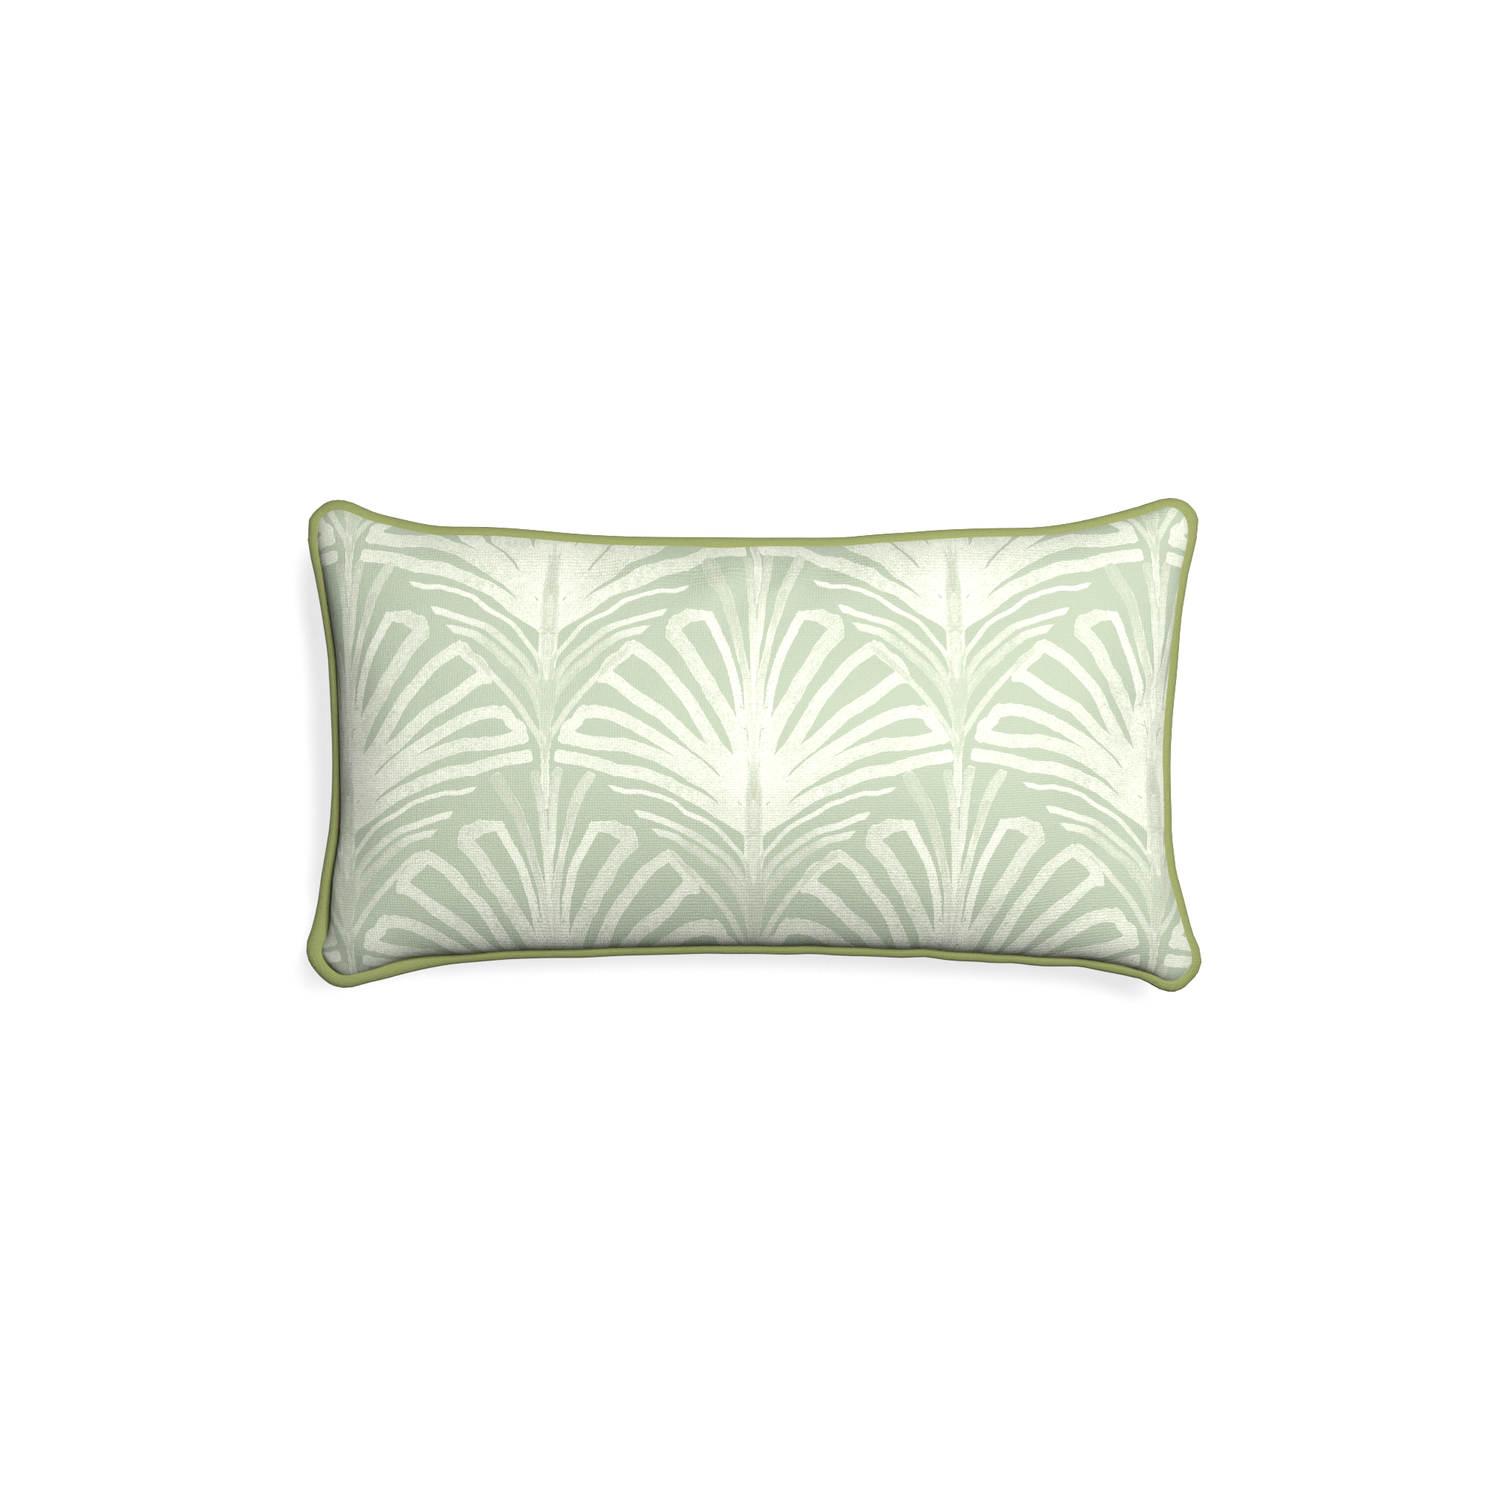 Petite-lumbar suzy sage custom sage green palmpillow with moss piping on white background